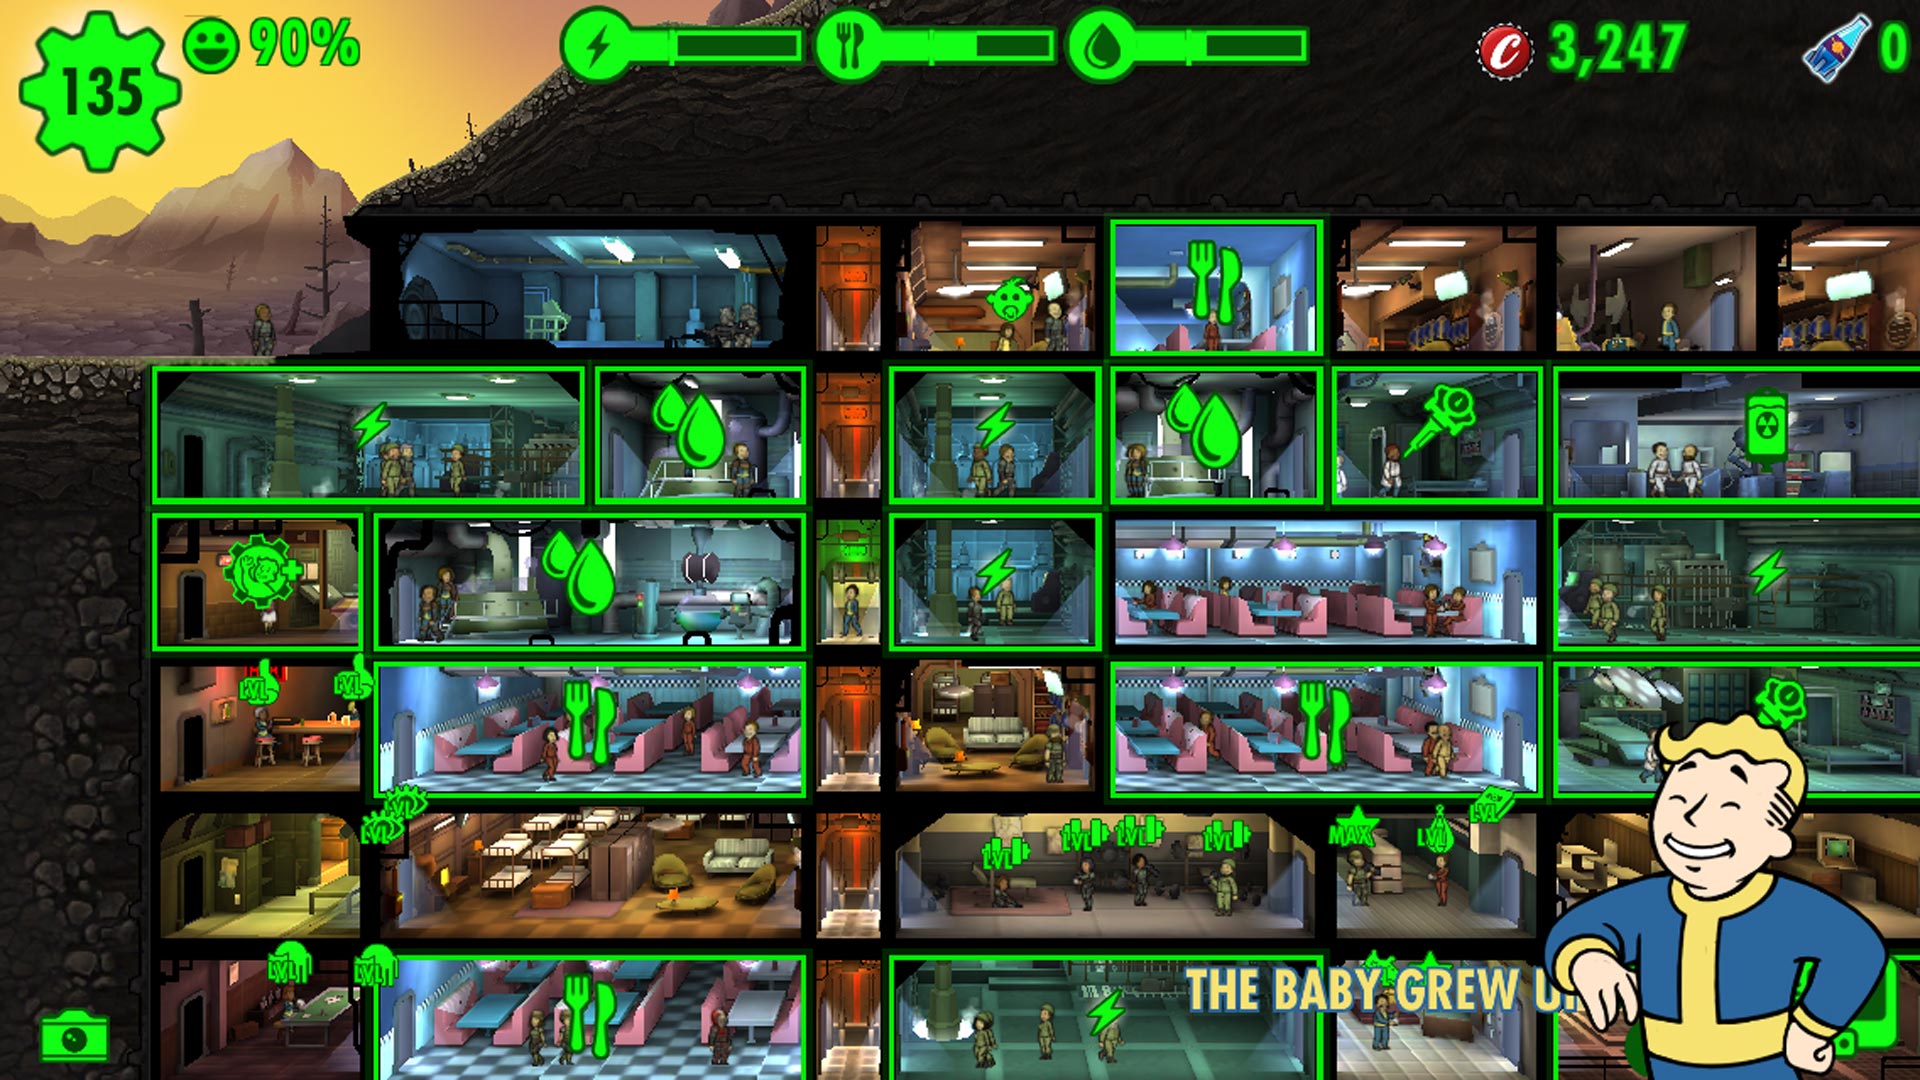 download free best fallout shelter